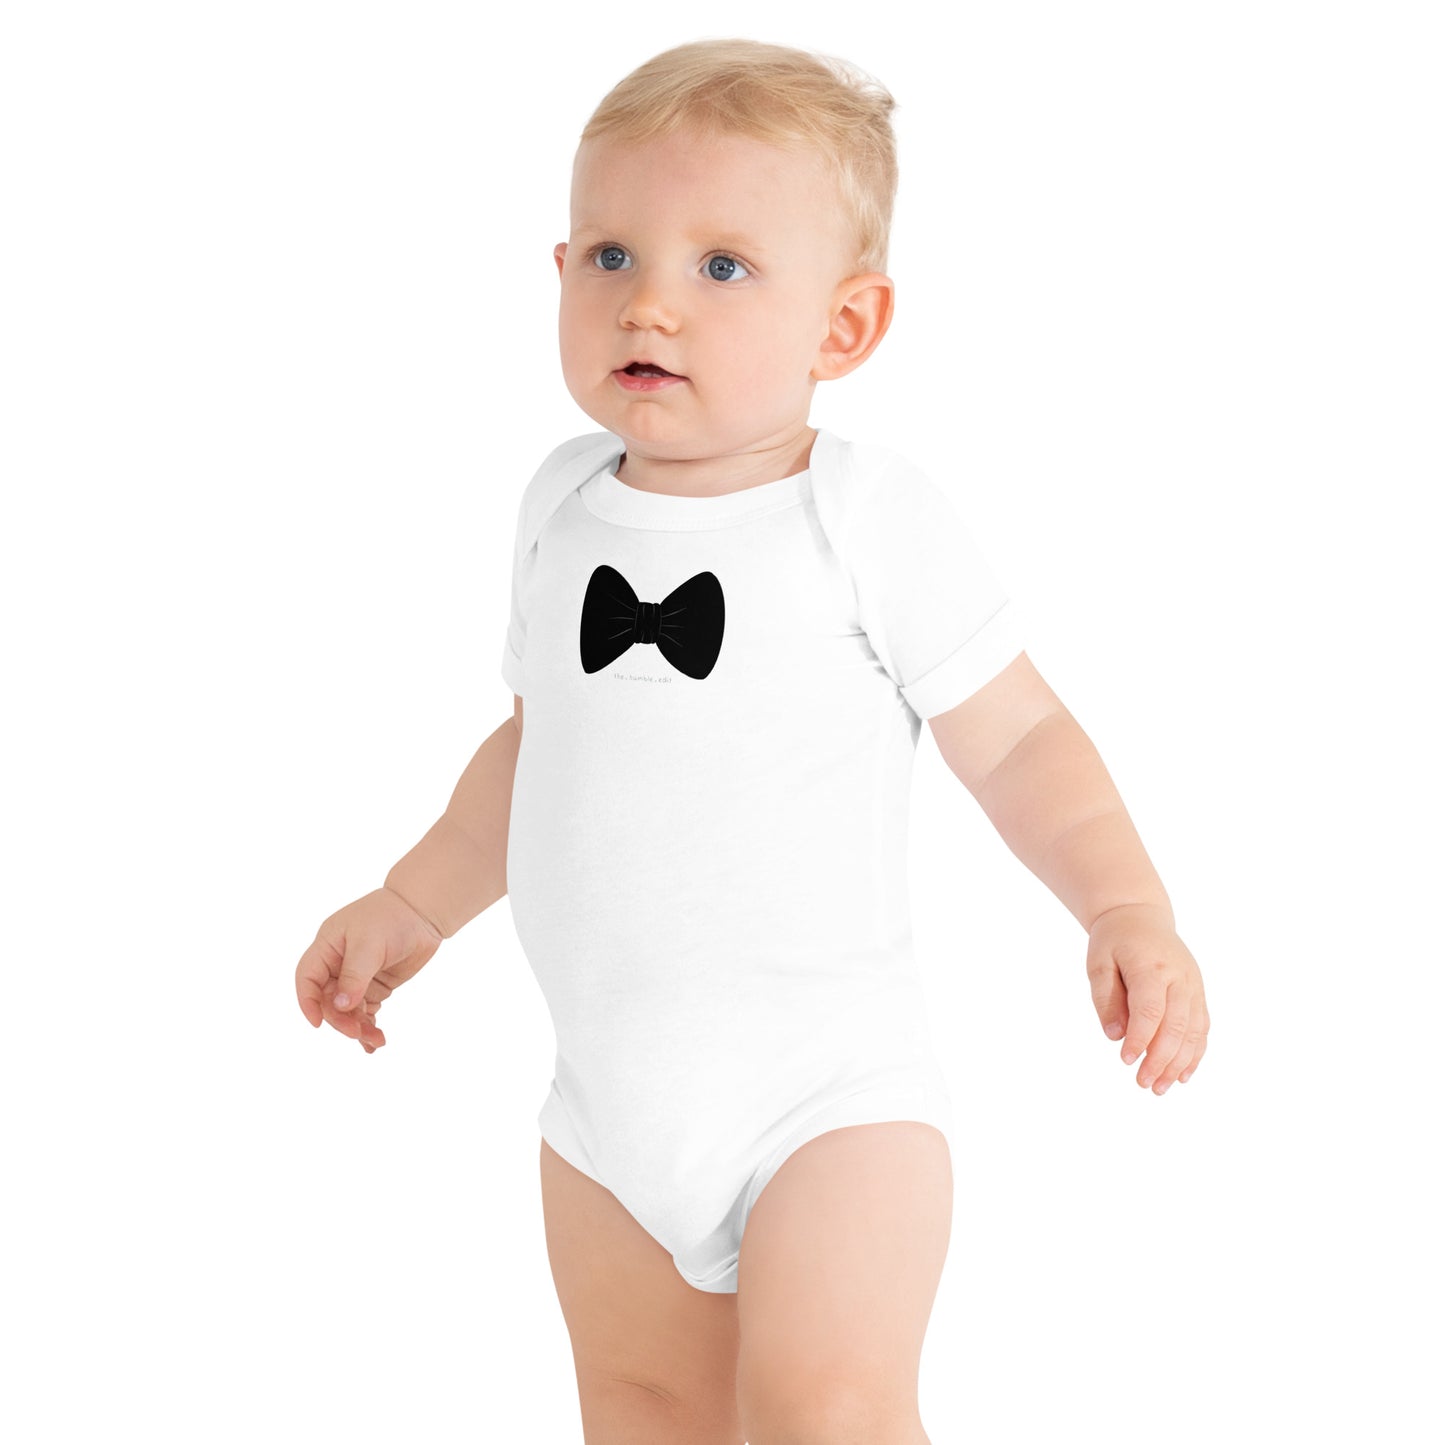 Baby Chic Bow Tie - Baby Short Sleeve One Piece